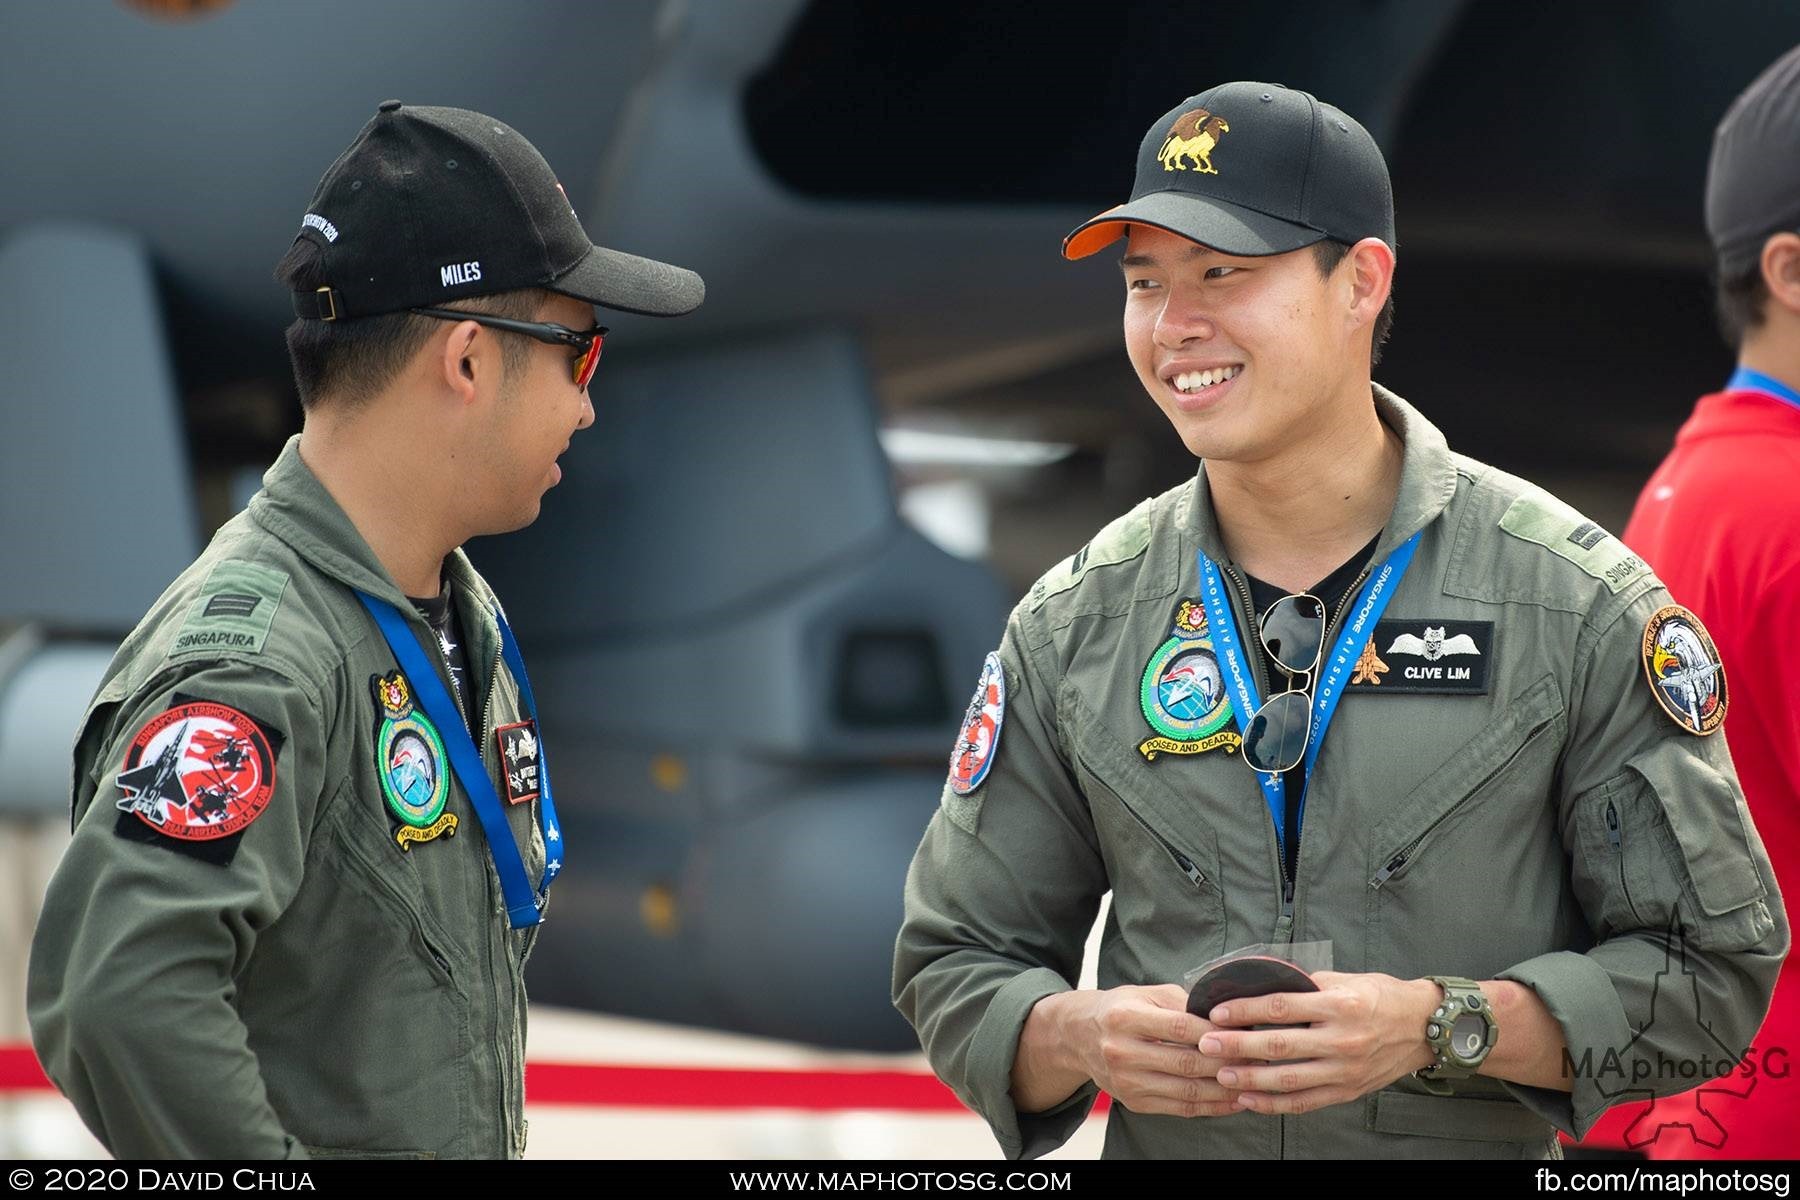 RSAF pilots sharing a moment during a lull in visitors to their aircraft